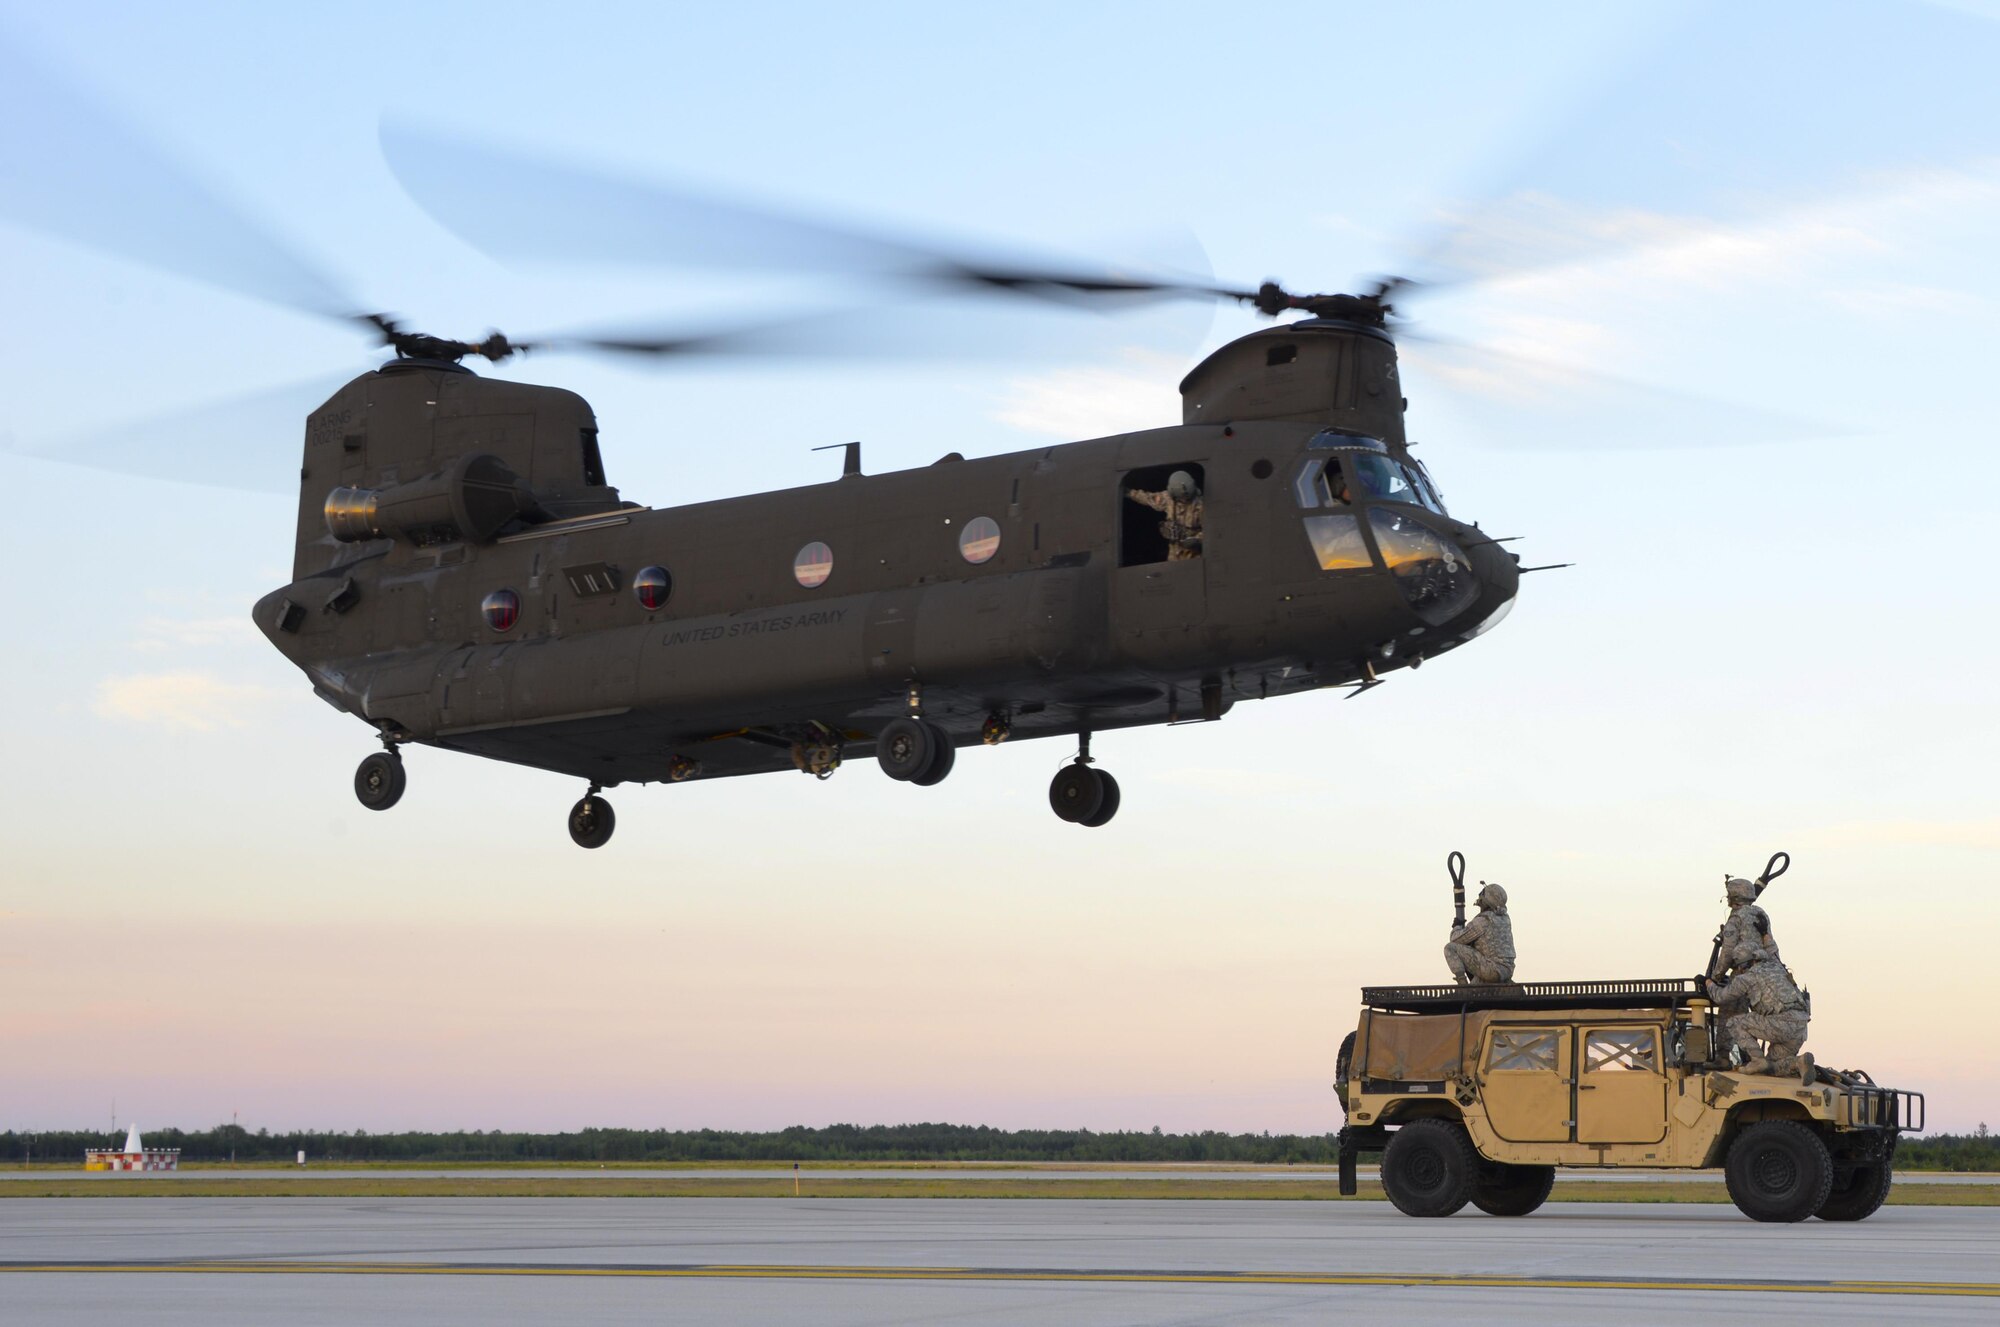 Airmen from the 821st Contingency Response Group out of Travis Air Force Base, California, get positioned to attach a HUMVEE to a U.S. Army CH-47 Chinook at Alpena Combat Readiness Training Center, Michigan, during Exercise Northern Strike, Aug. 9, 2016. Exercise Northern Strike is a large-scale exercise coordinated by the Michigan Army National Guard and features Army, Marines and Air Force working together for total force integration.  (U.S. Air Force photo by Senior Airman Amber Carter)